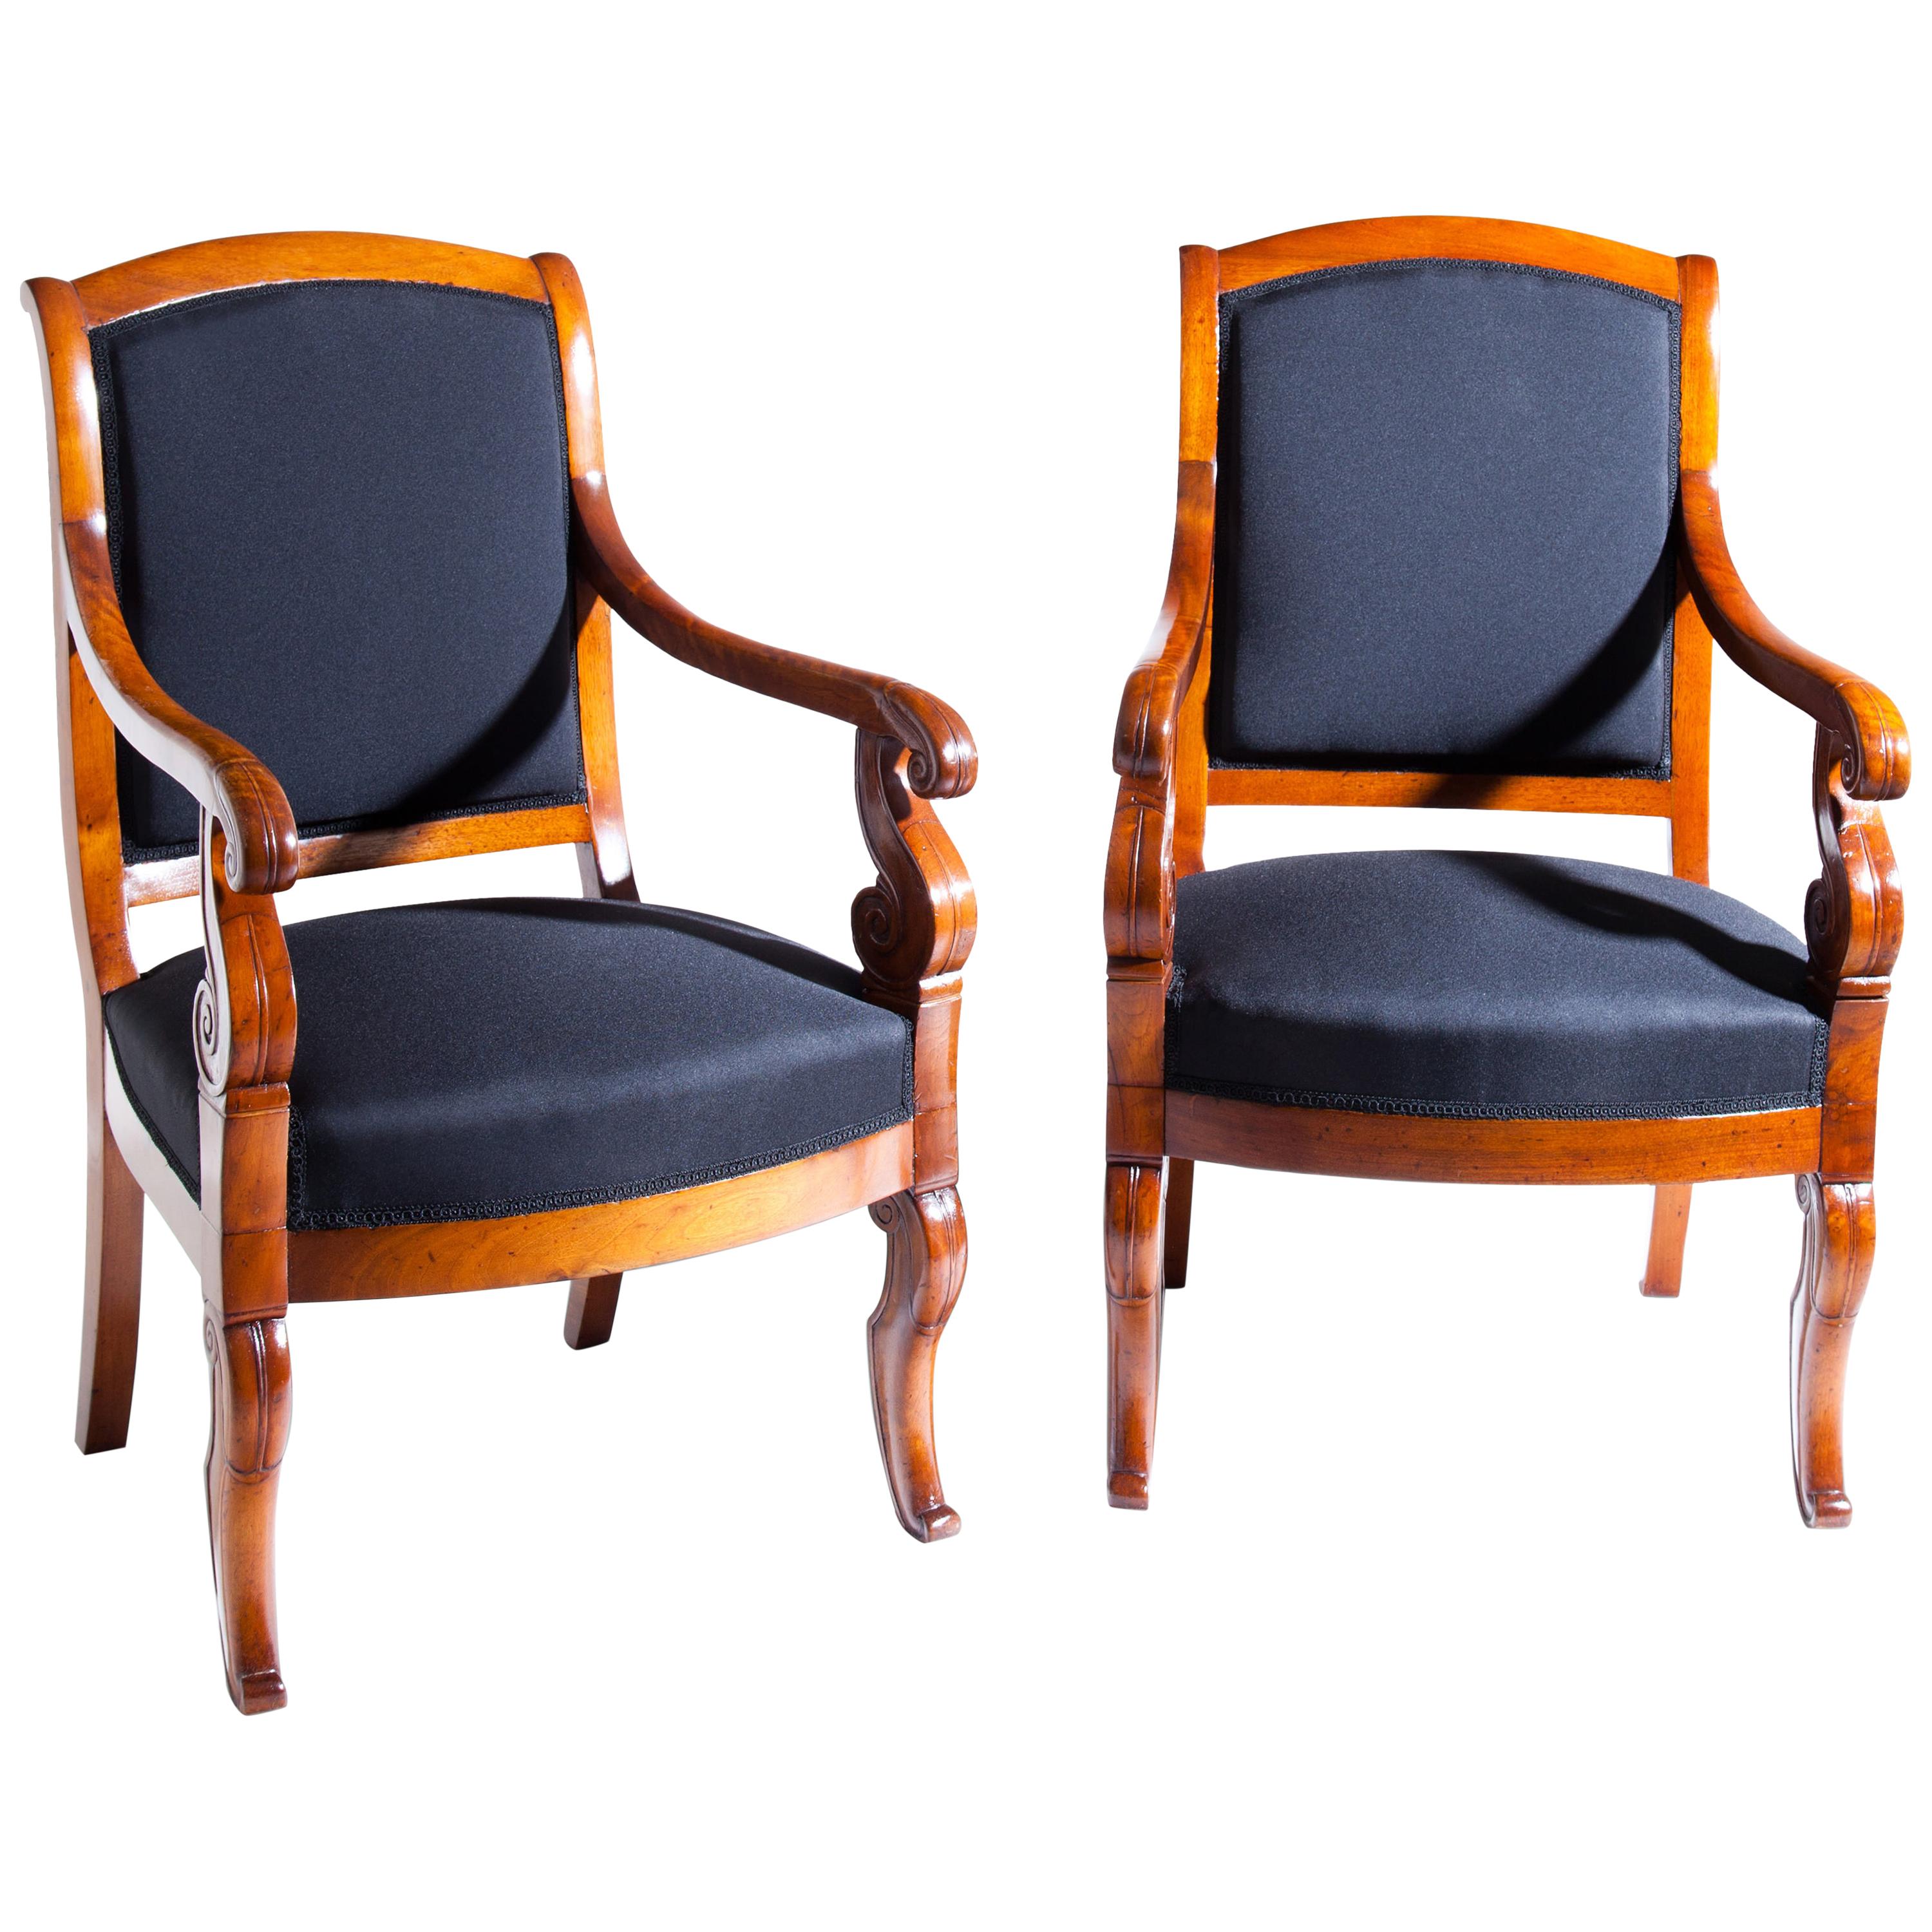 Pair of Cherrywood Armchairs, France, First Half of the 19th Century